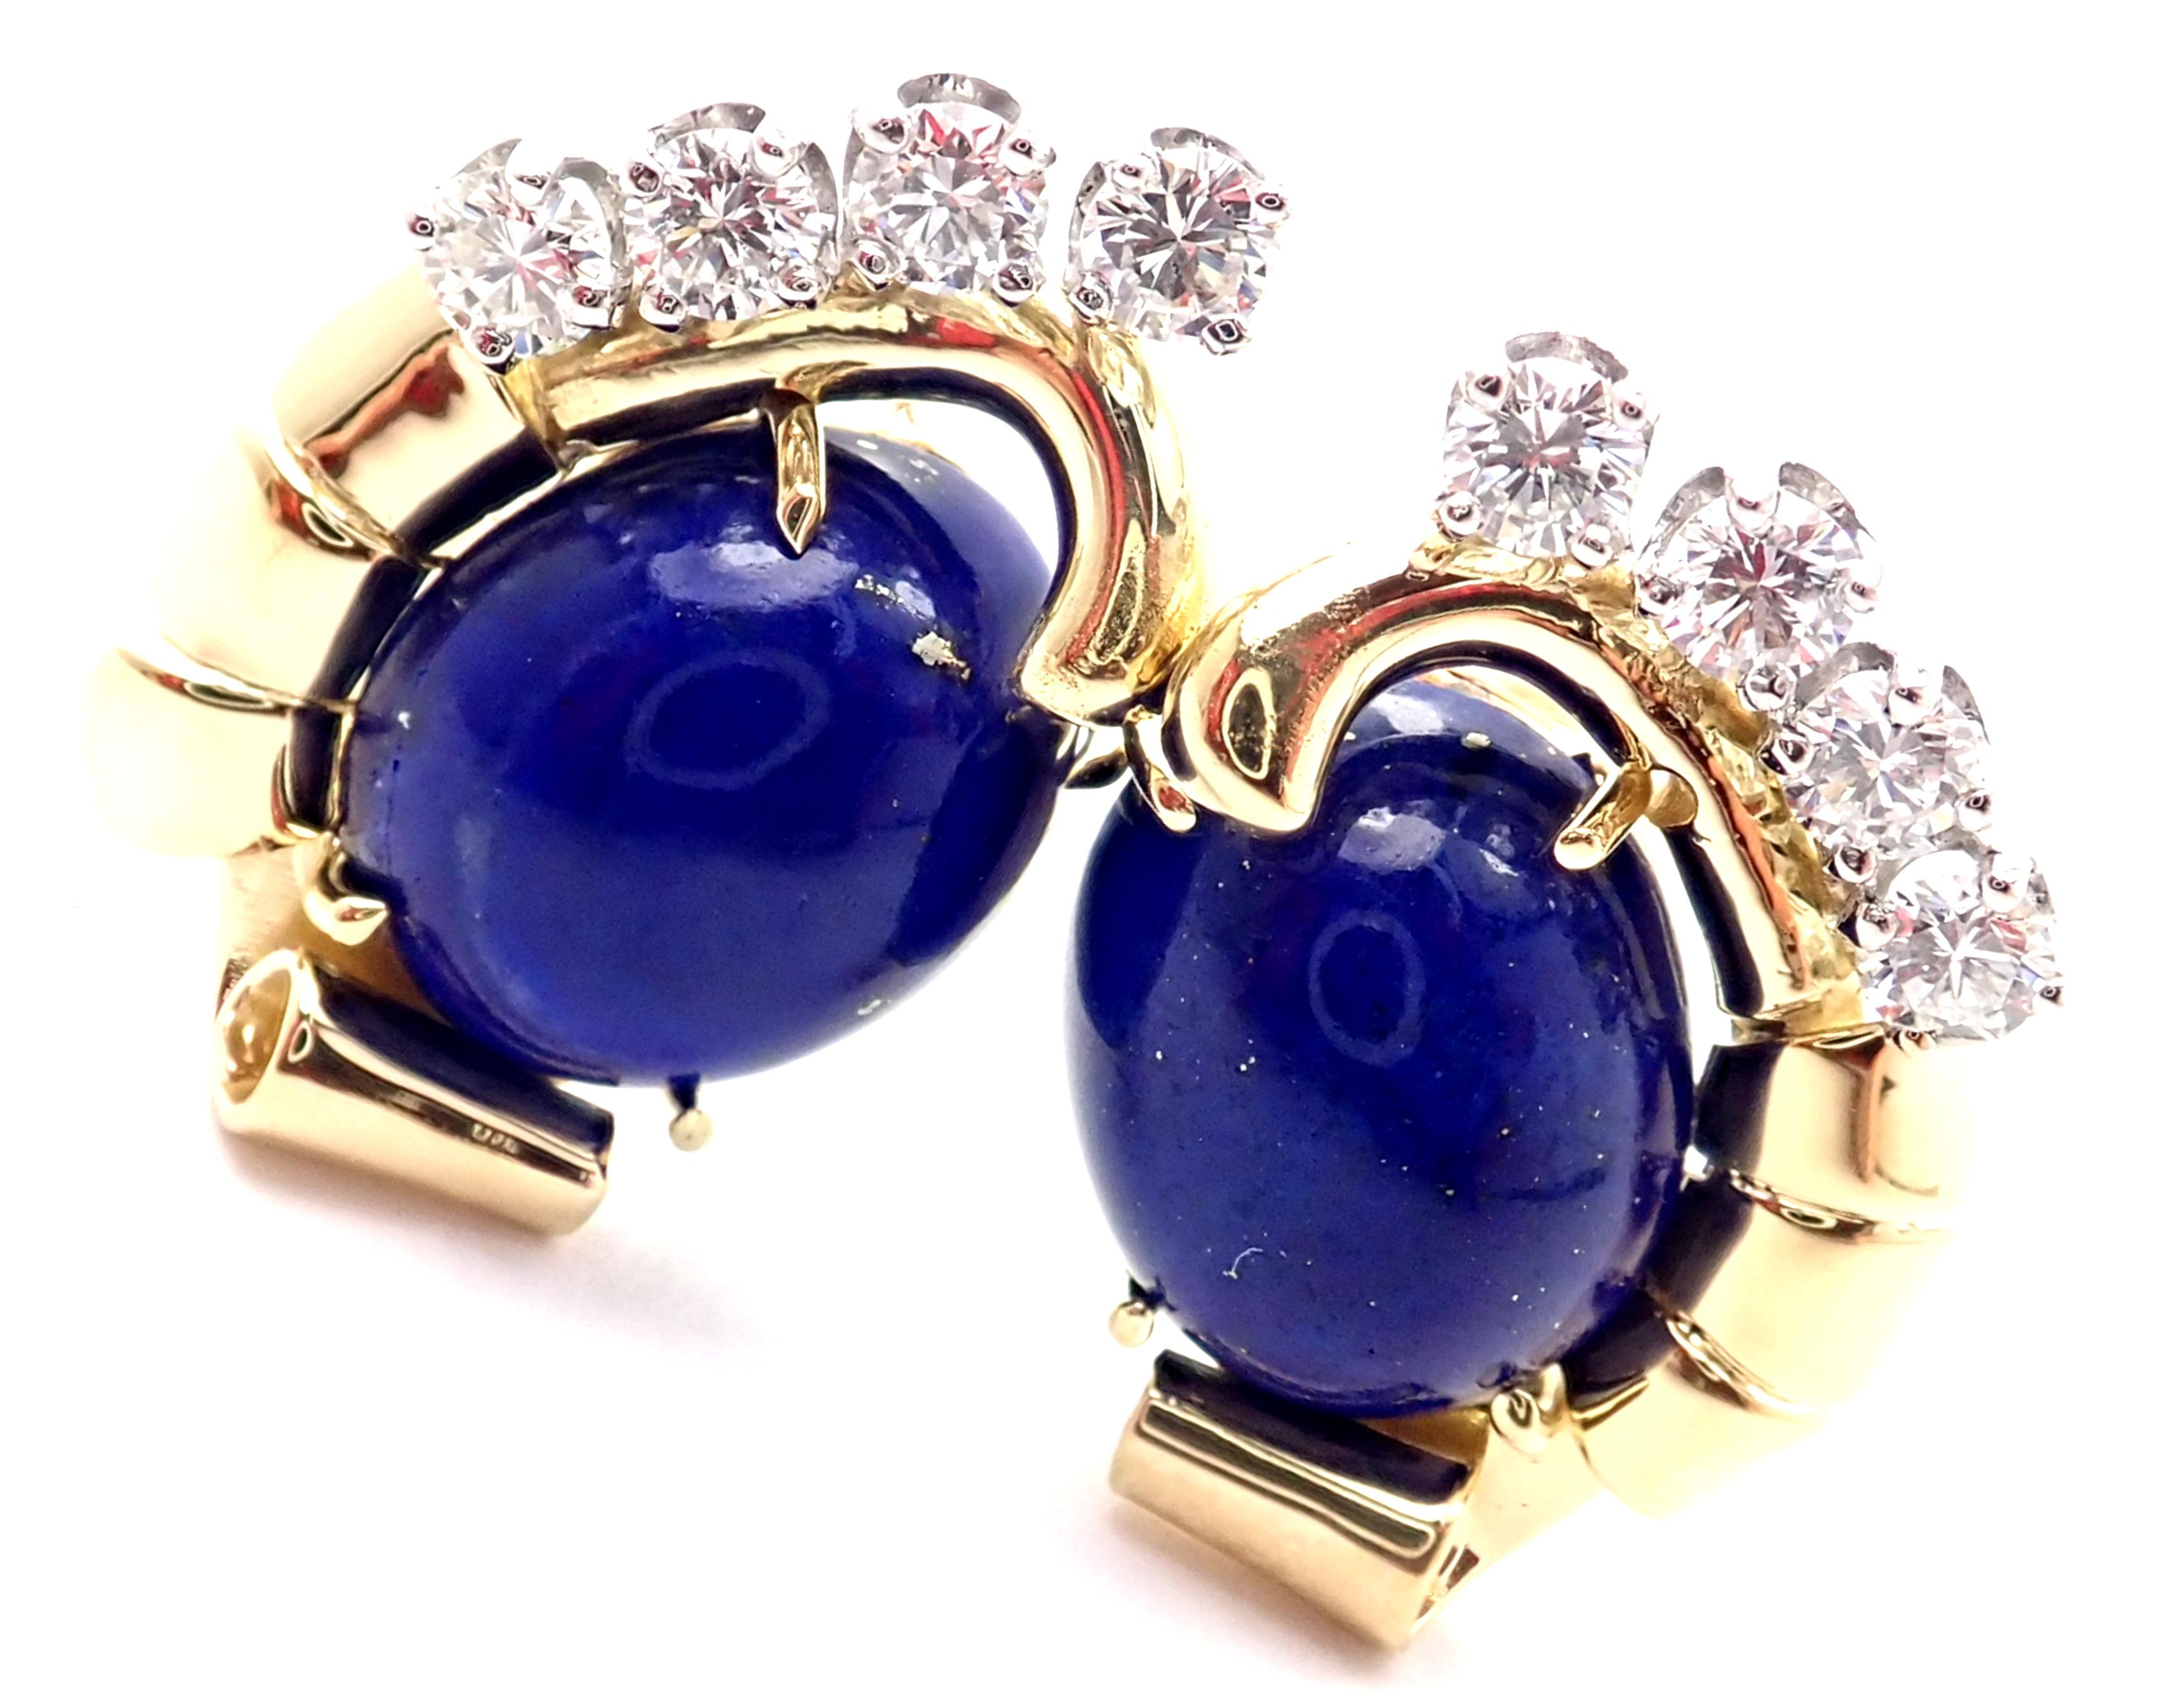 18k Yellow Gold Diamond Lapis Lazuli Vintage Earrings by Raymond Yard.
With 8 round brilliant cut diamonds VS1 clarity, G color total weight approximately 0.56ct
2 oval shape lapis lazuli stones 13mm x 10mm
Details:
Weight: 9.7 grams
Measurements: